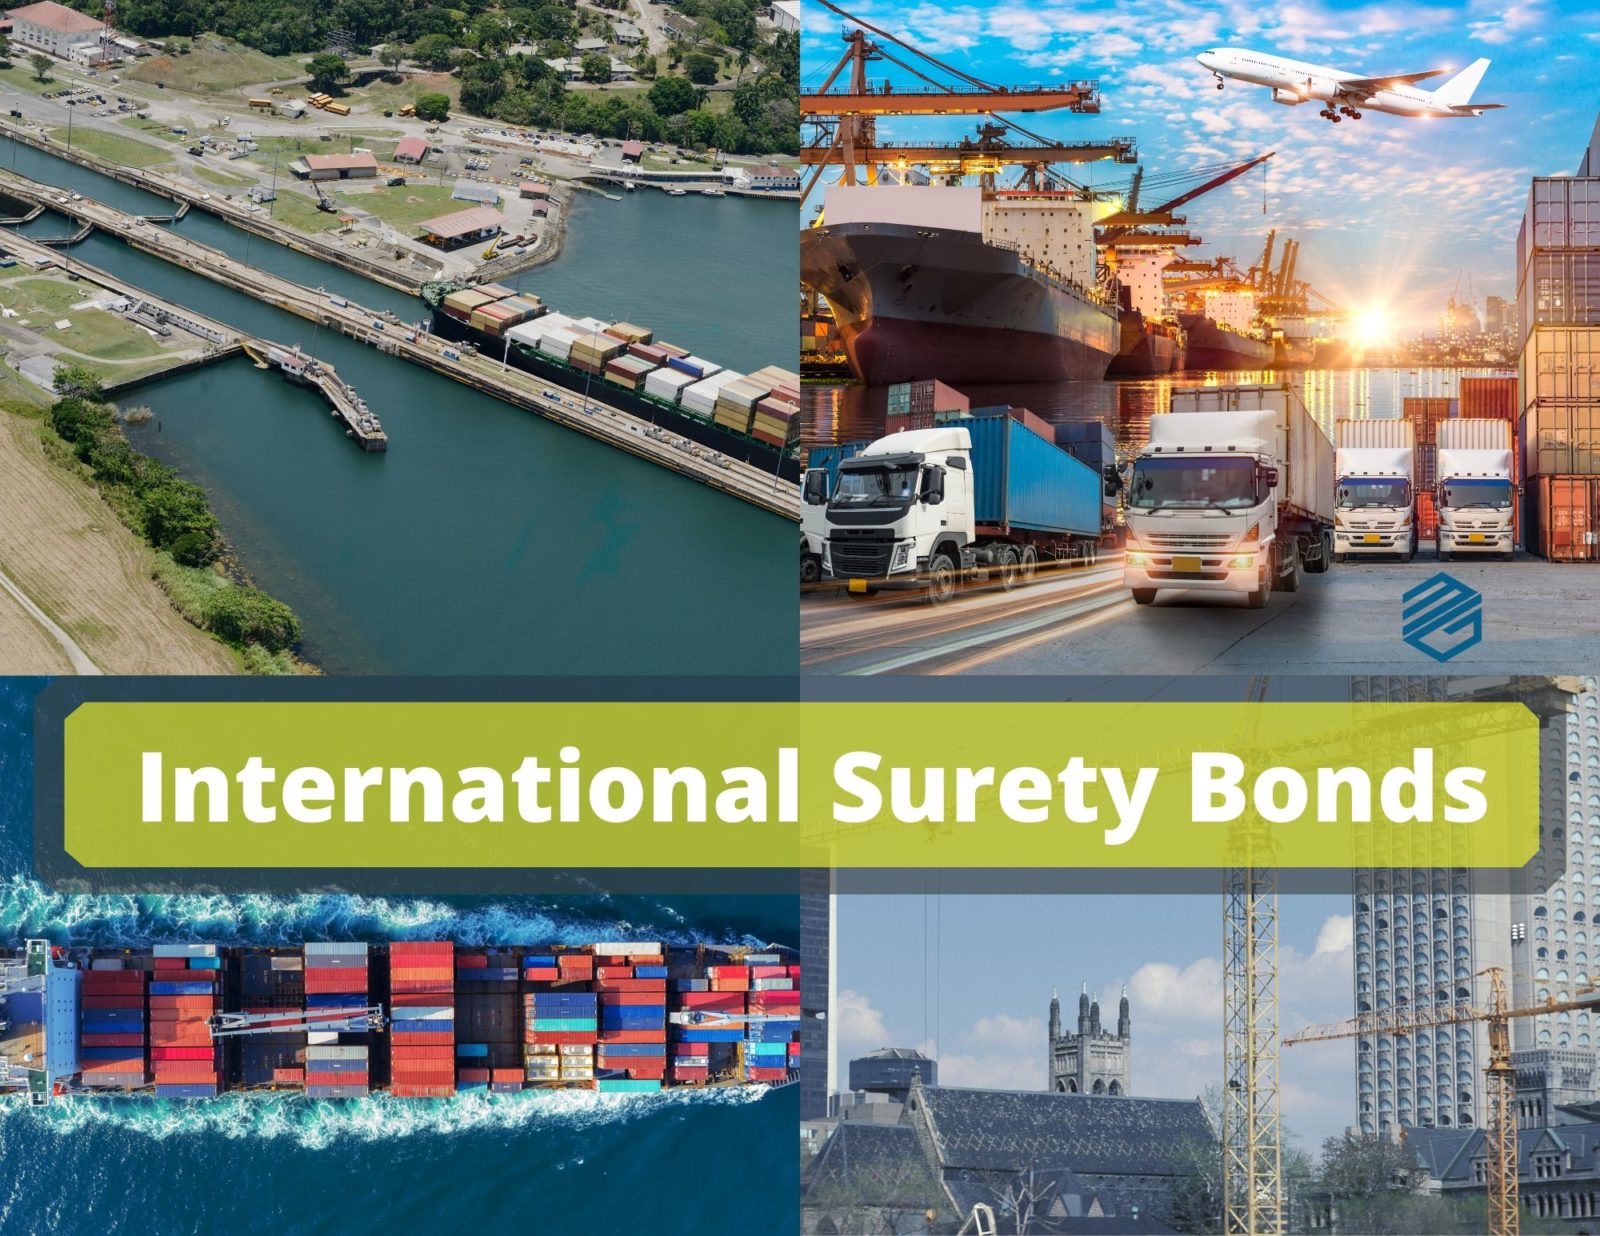 International Surety Bonds - Four pictures. One of a shipyard and trucks, one of a cargo ship in the ocean, one of a construction crane and one of the Panama Canal. International Surety Bonds in gray white and yellow.